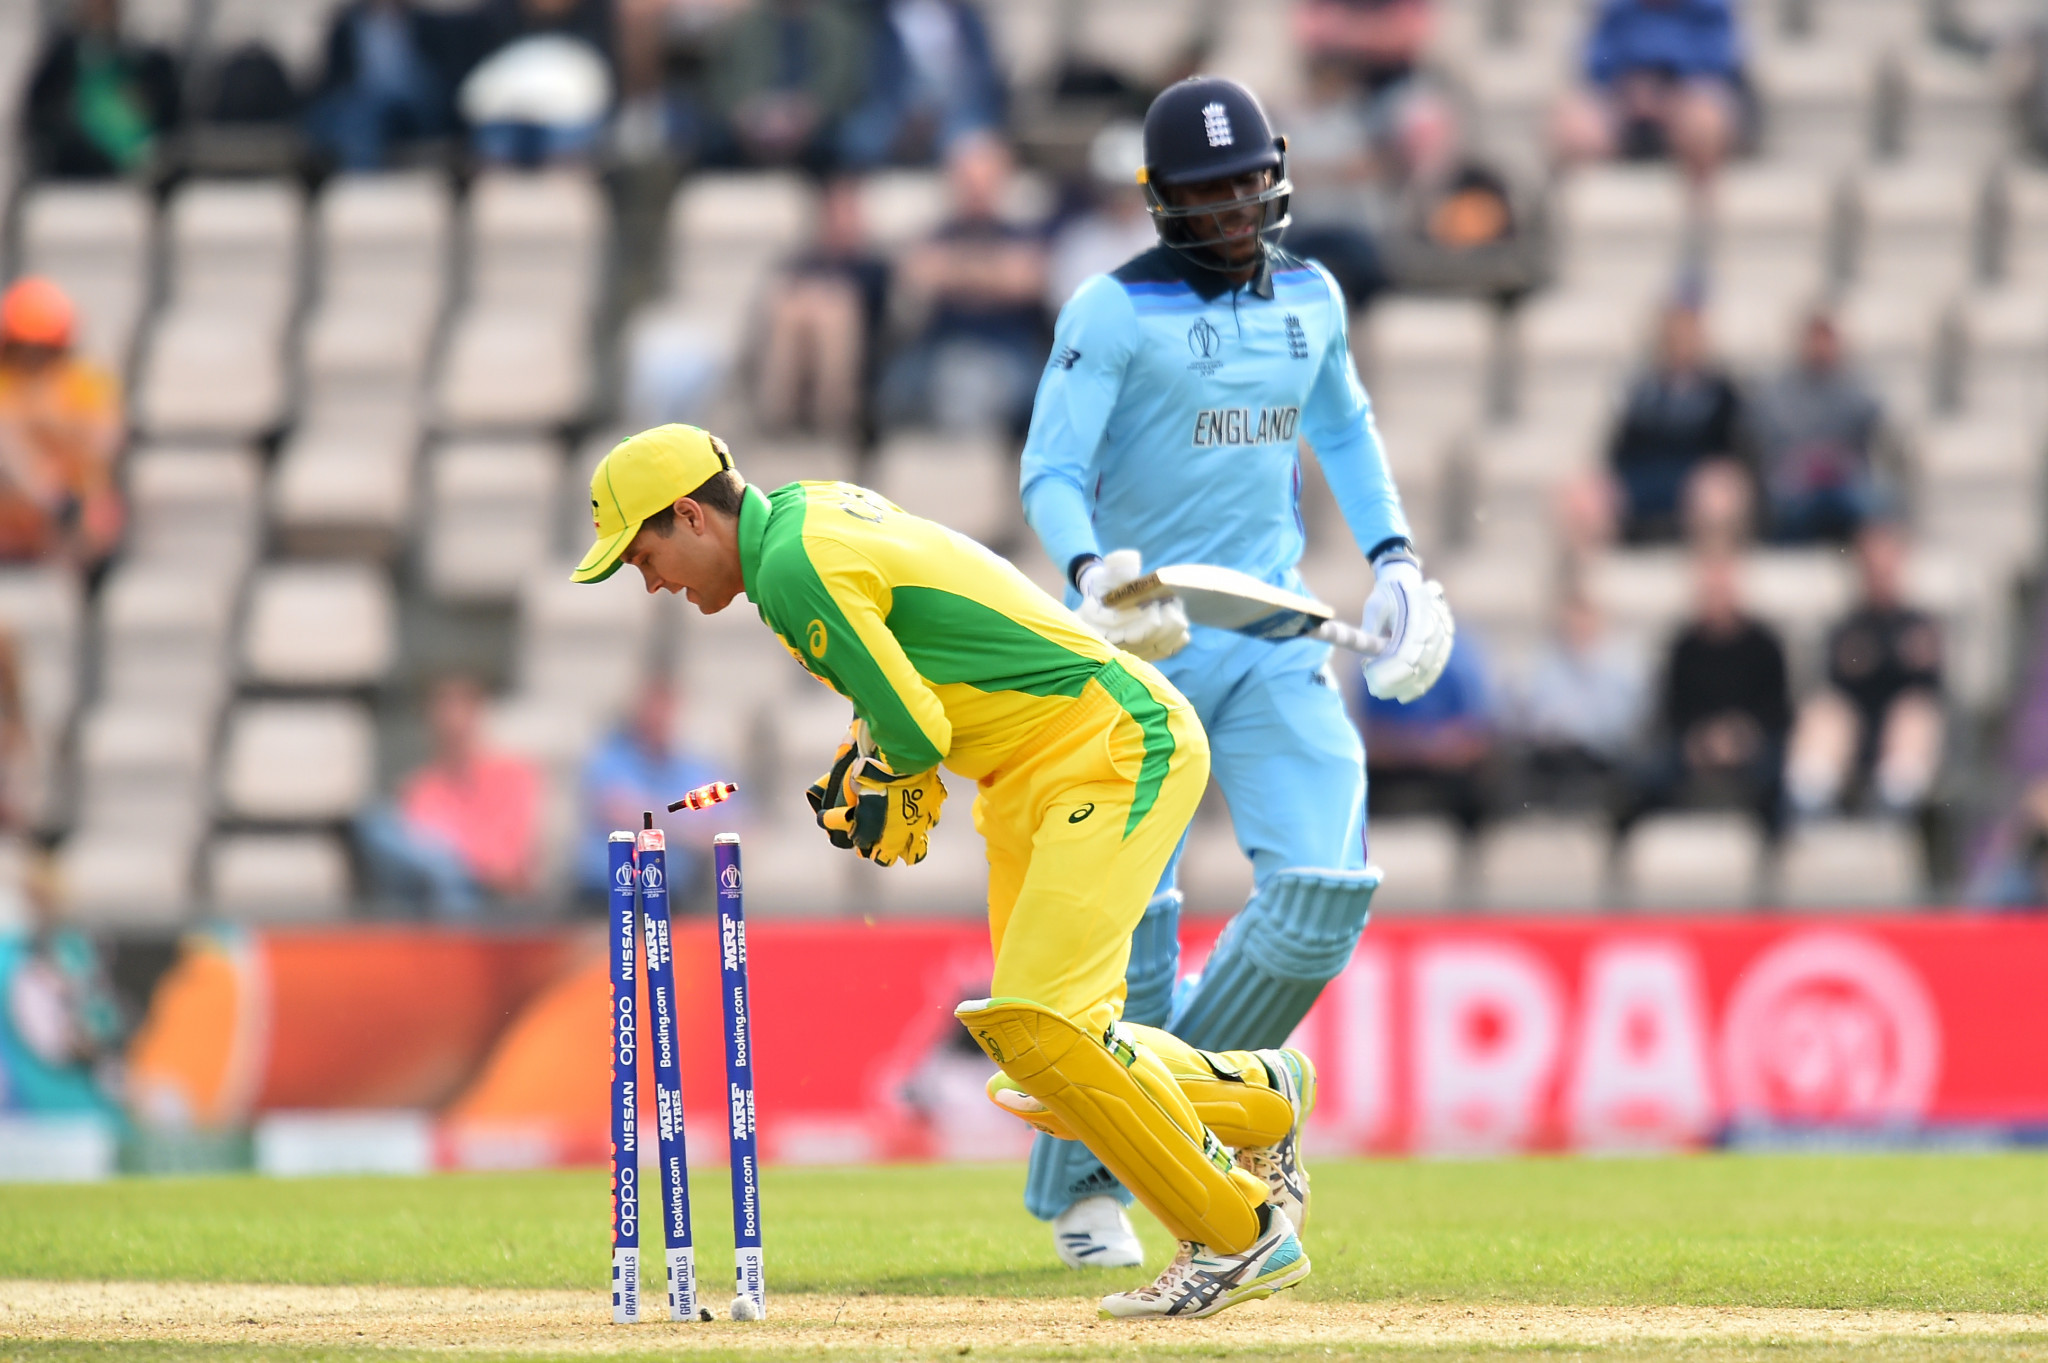 Australia defeated England by 12 runs in a warm-up game for the ICC Cricket World Cup ©Getty Images